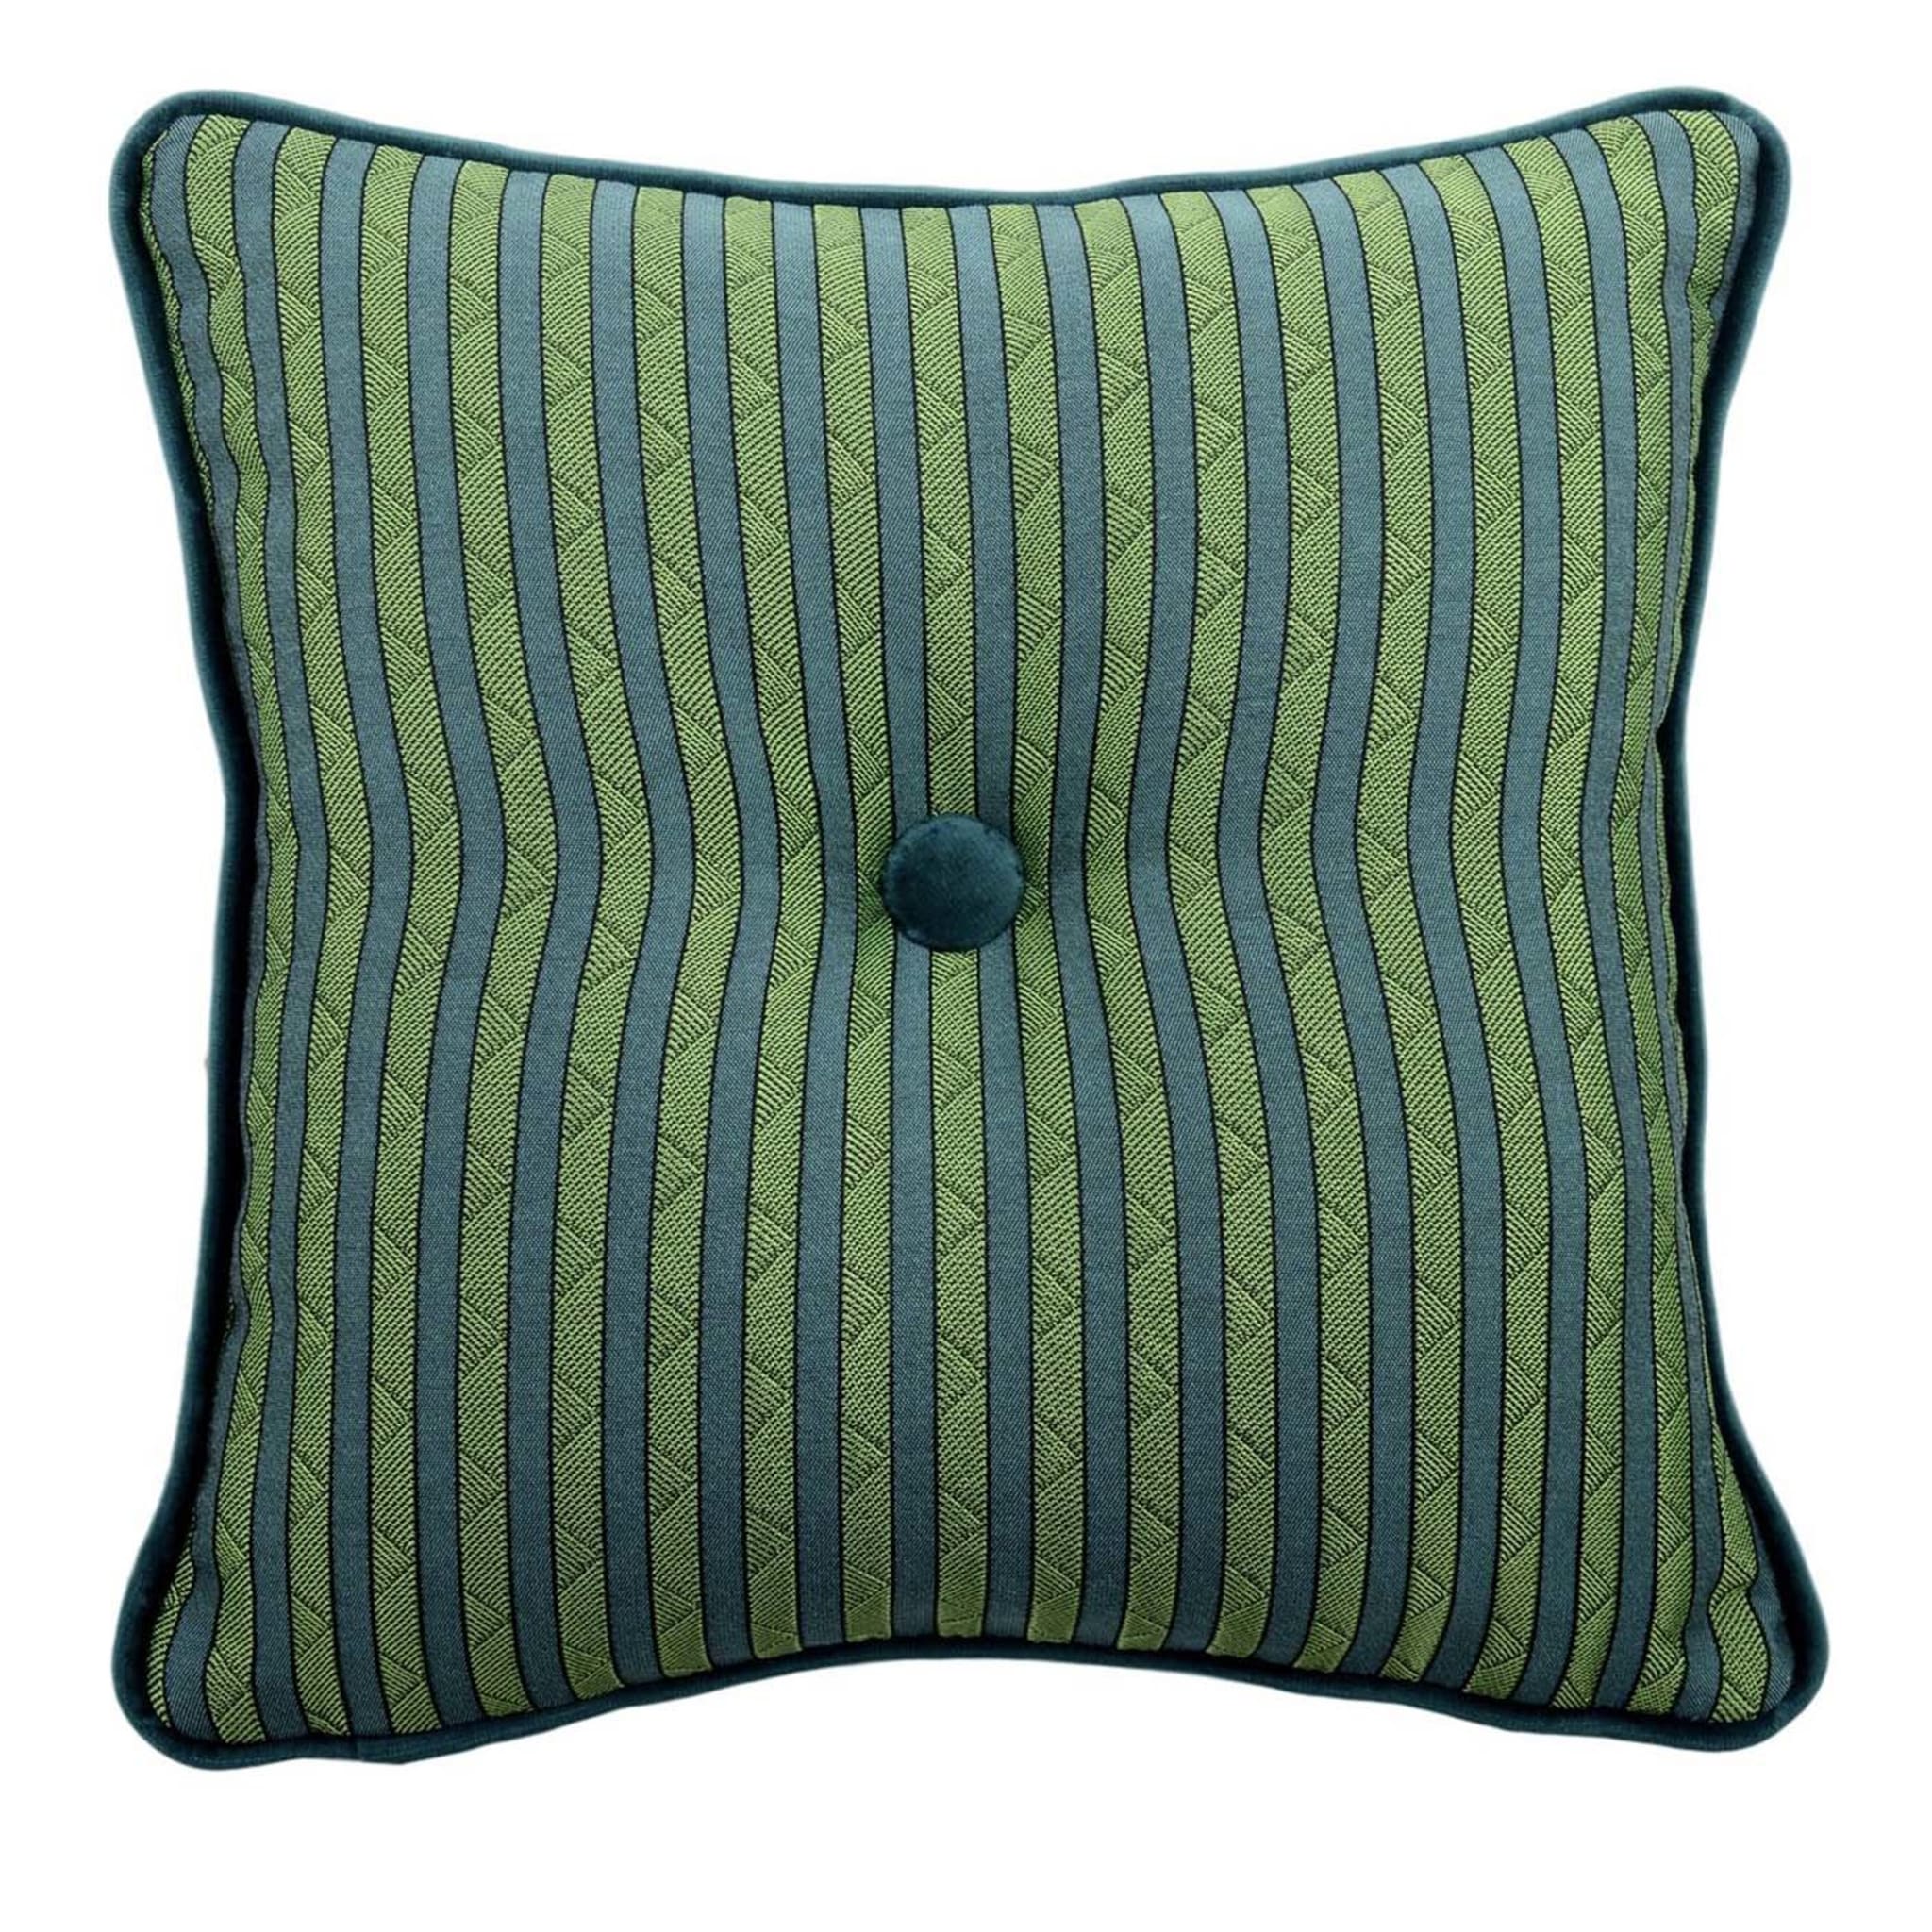 Emerald Carré Cushion in striped jacquard fabric and silk velvet - Main view